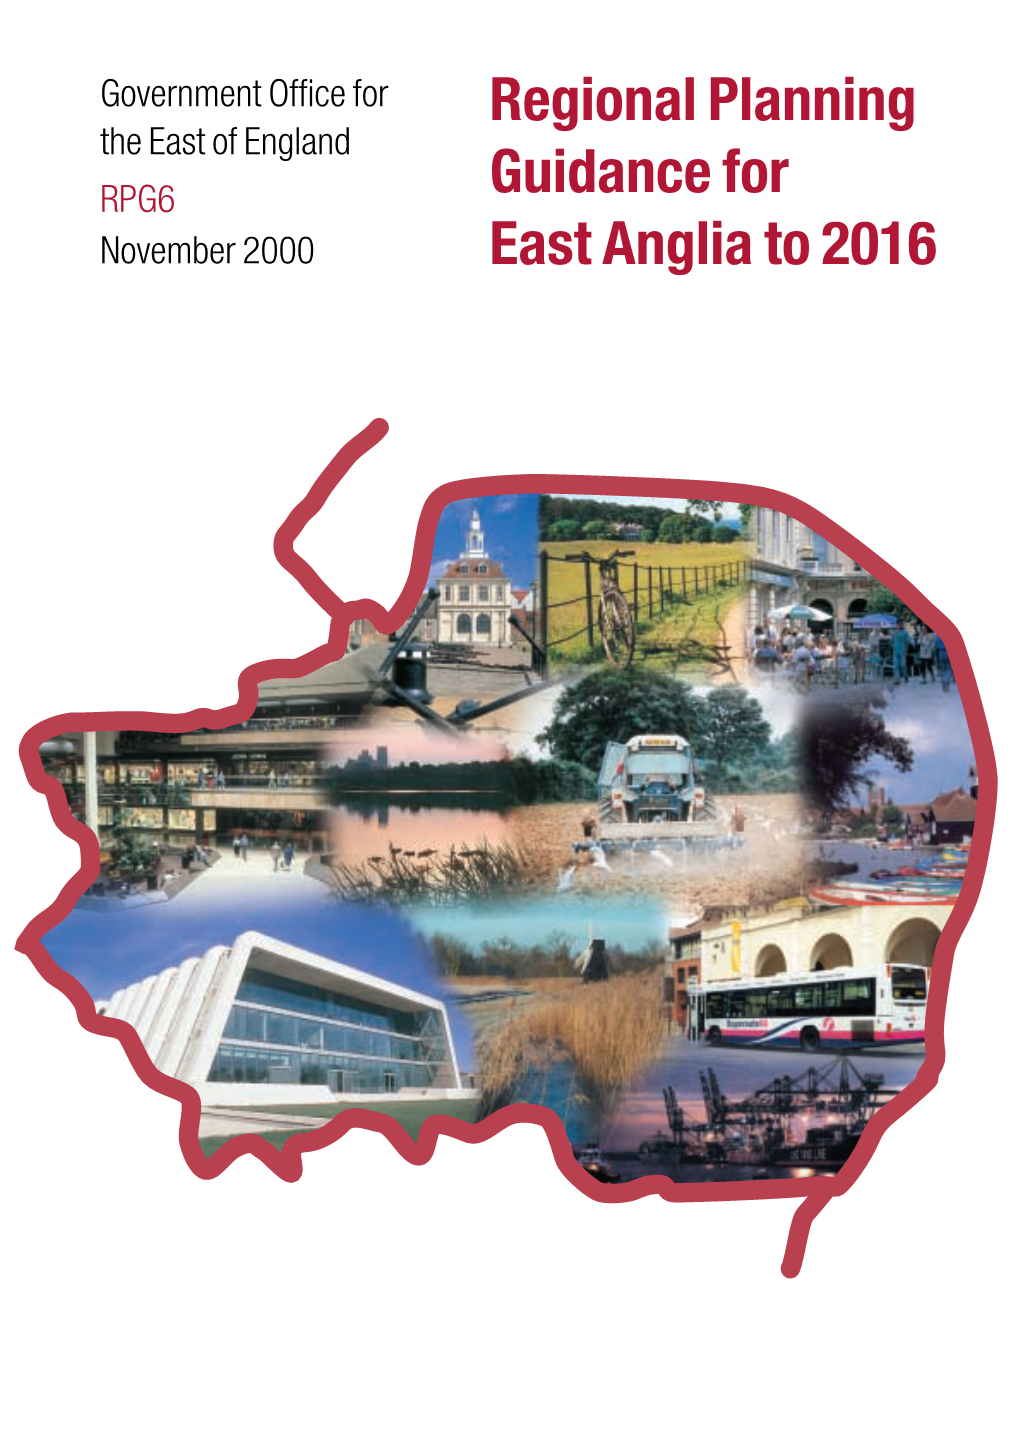 Regional Planning Guidance for East Anglia to 2016